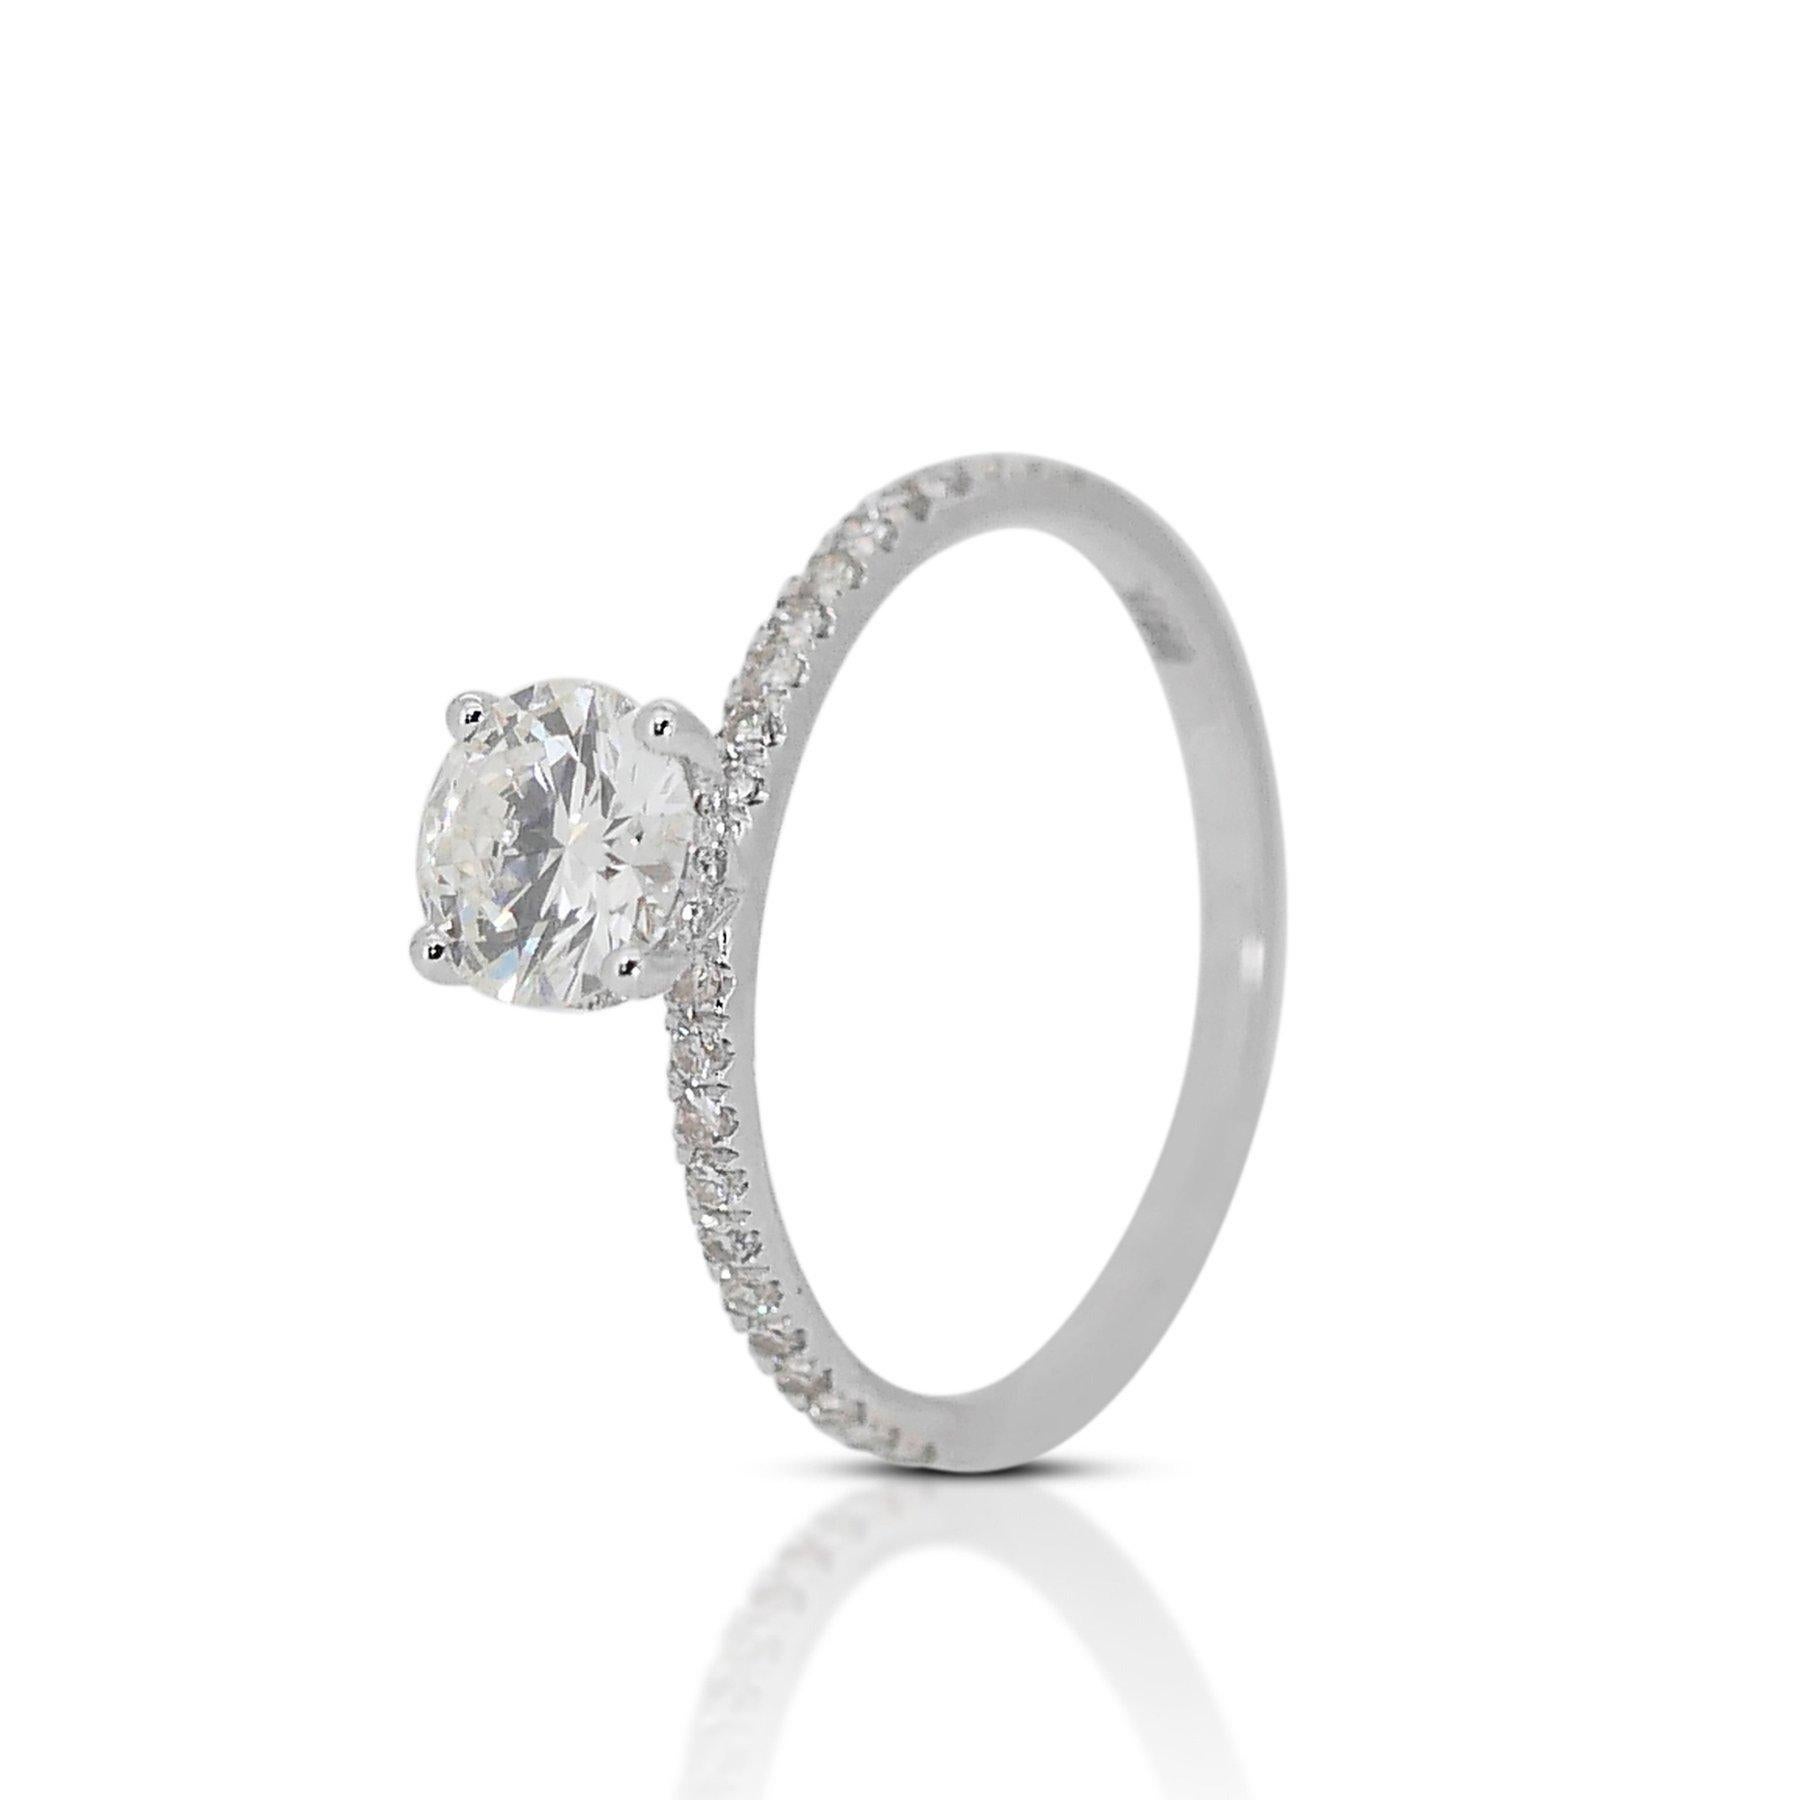 Luminous 1.16ct Diamond Pave Ring in  18k White Gold - GIA Certified

Indulge in the timeless elegance of this exquisite 18k white gold diamond pave ring, meticulously crafted to captivate hearts and sparkle with unparalleled brilliance. Enhancing